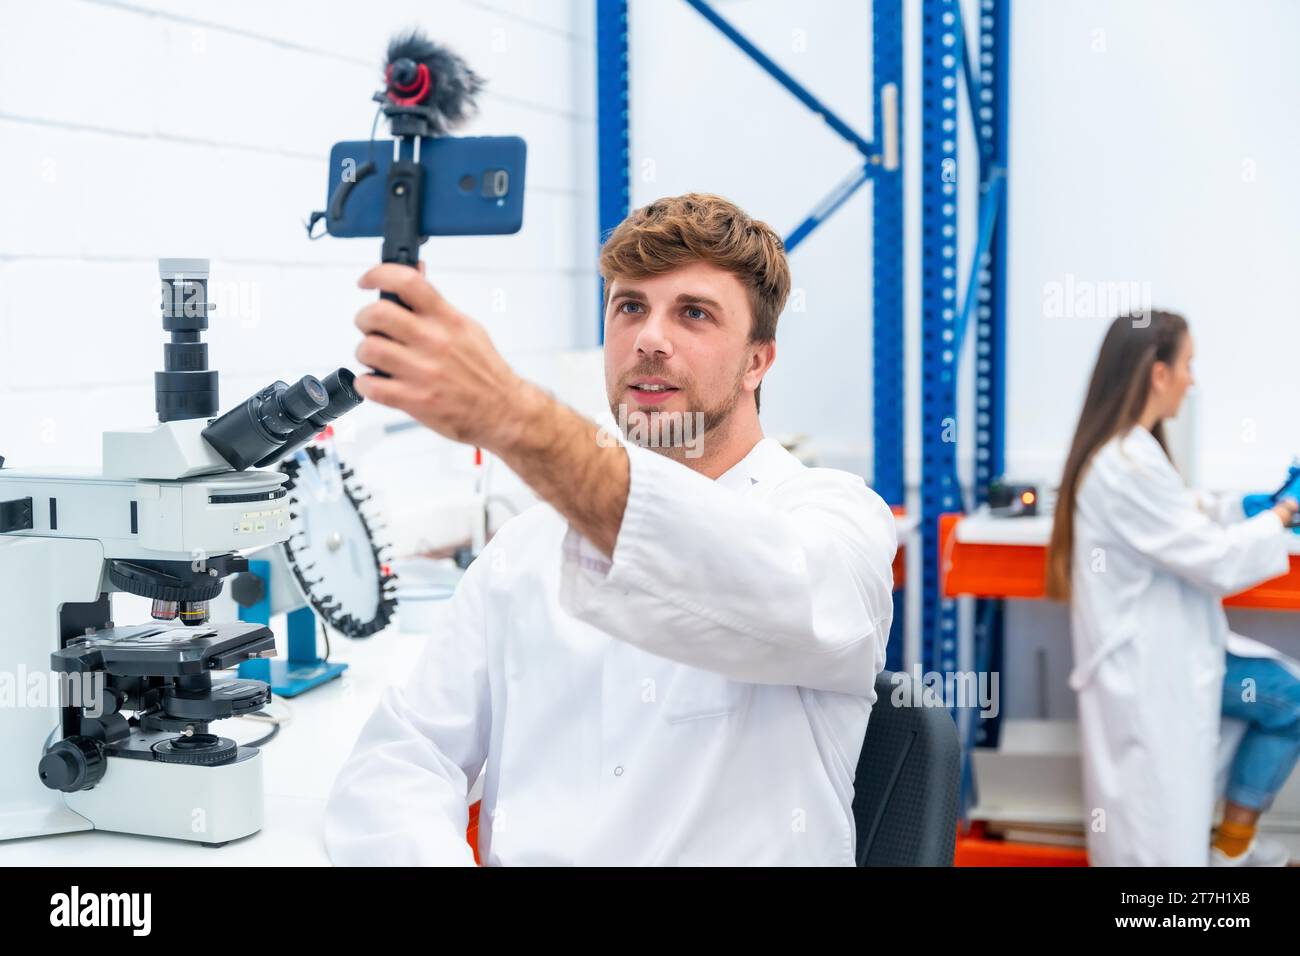 Young and Handsome scientist recording a video using phone inside a research laboratory Stock Photo